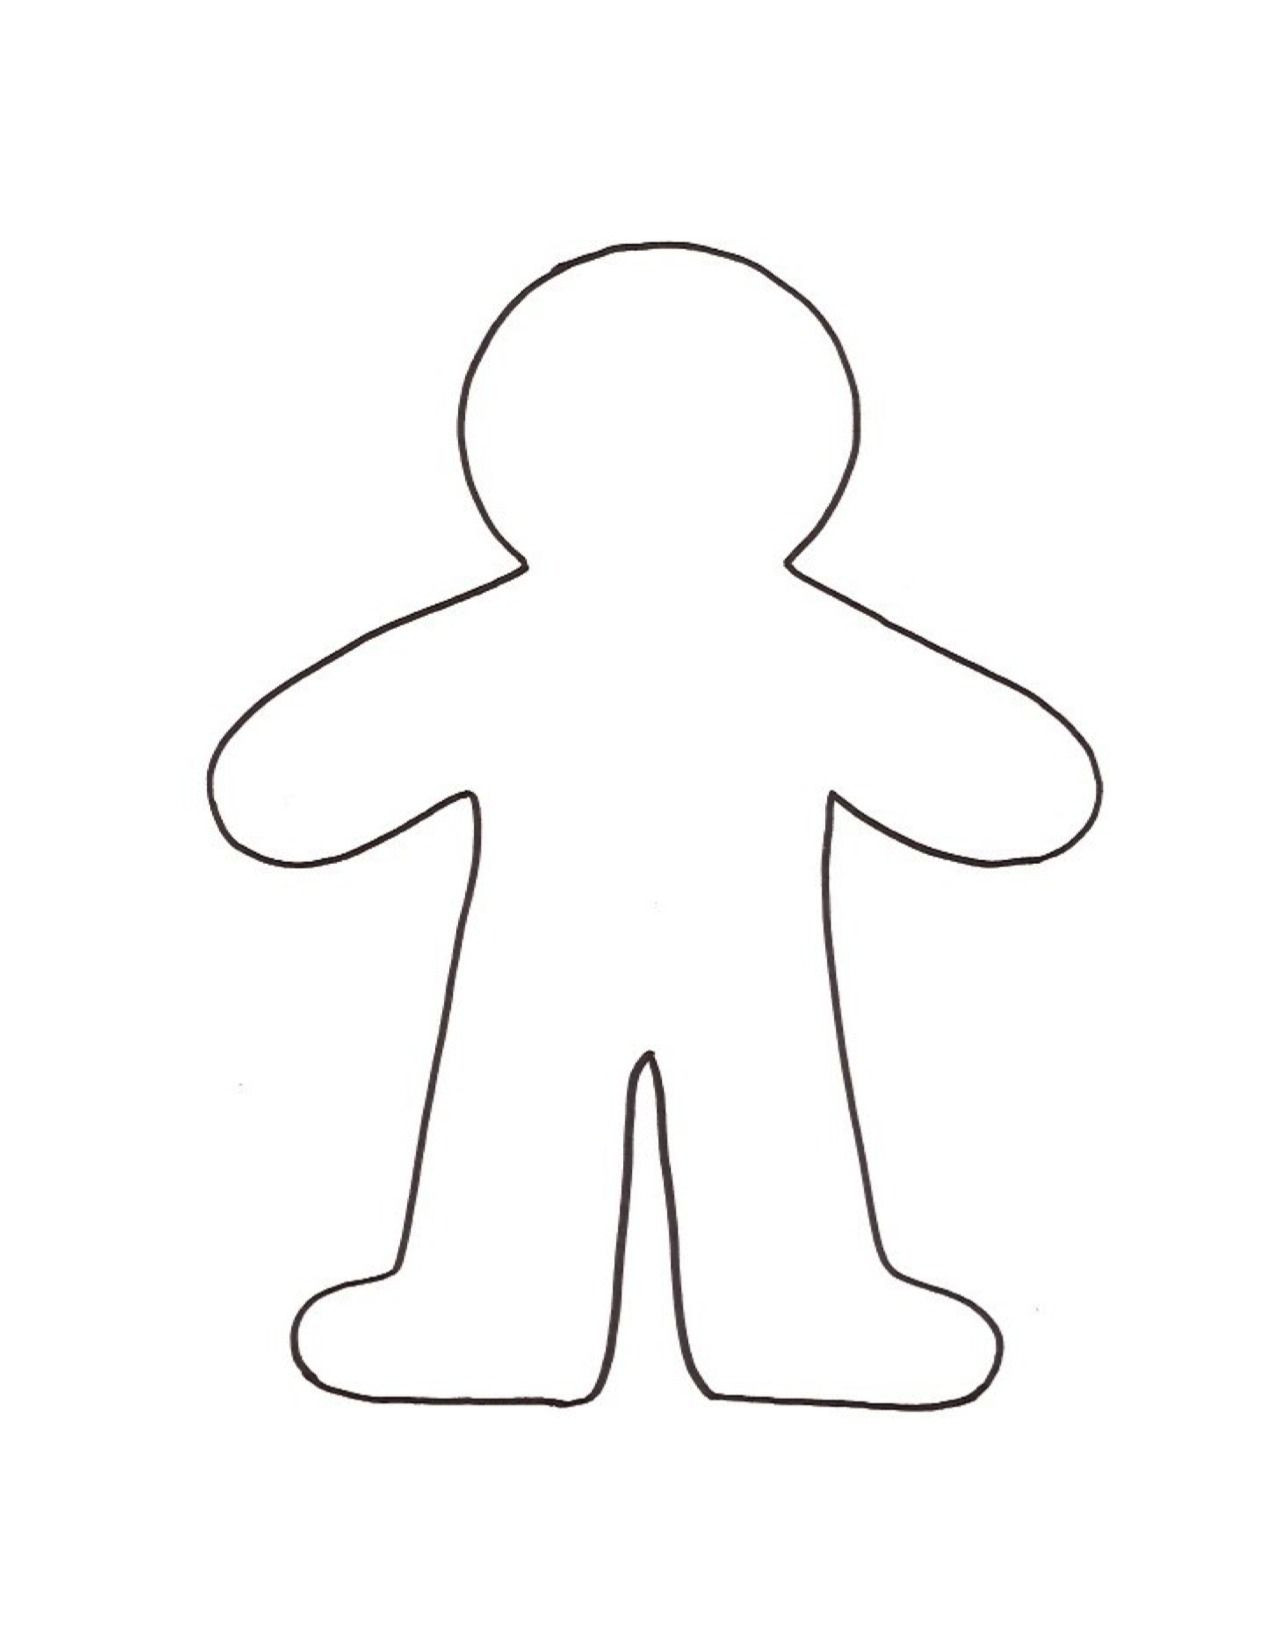 Gingerbread Baby Coloring Pages
 Gingerbread Baby Coloring Page Free Download